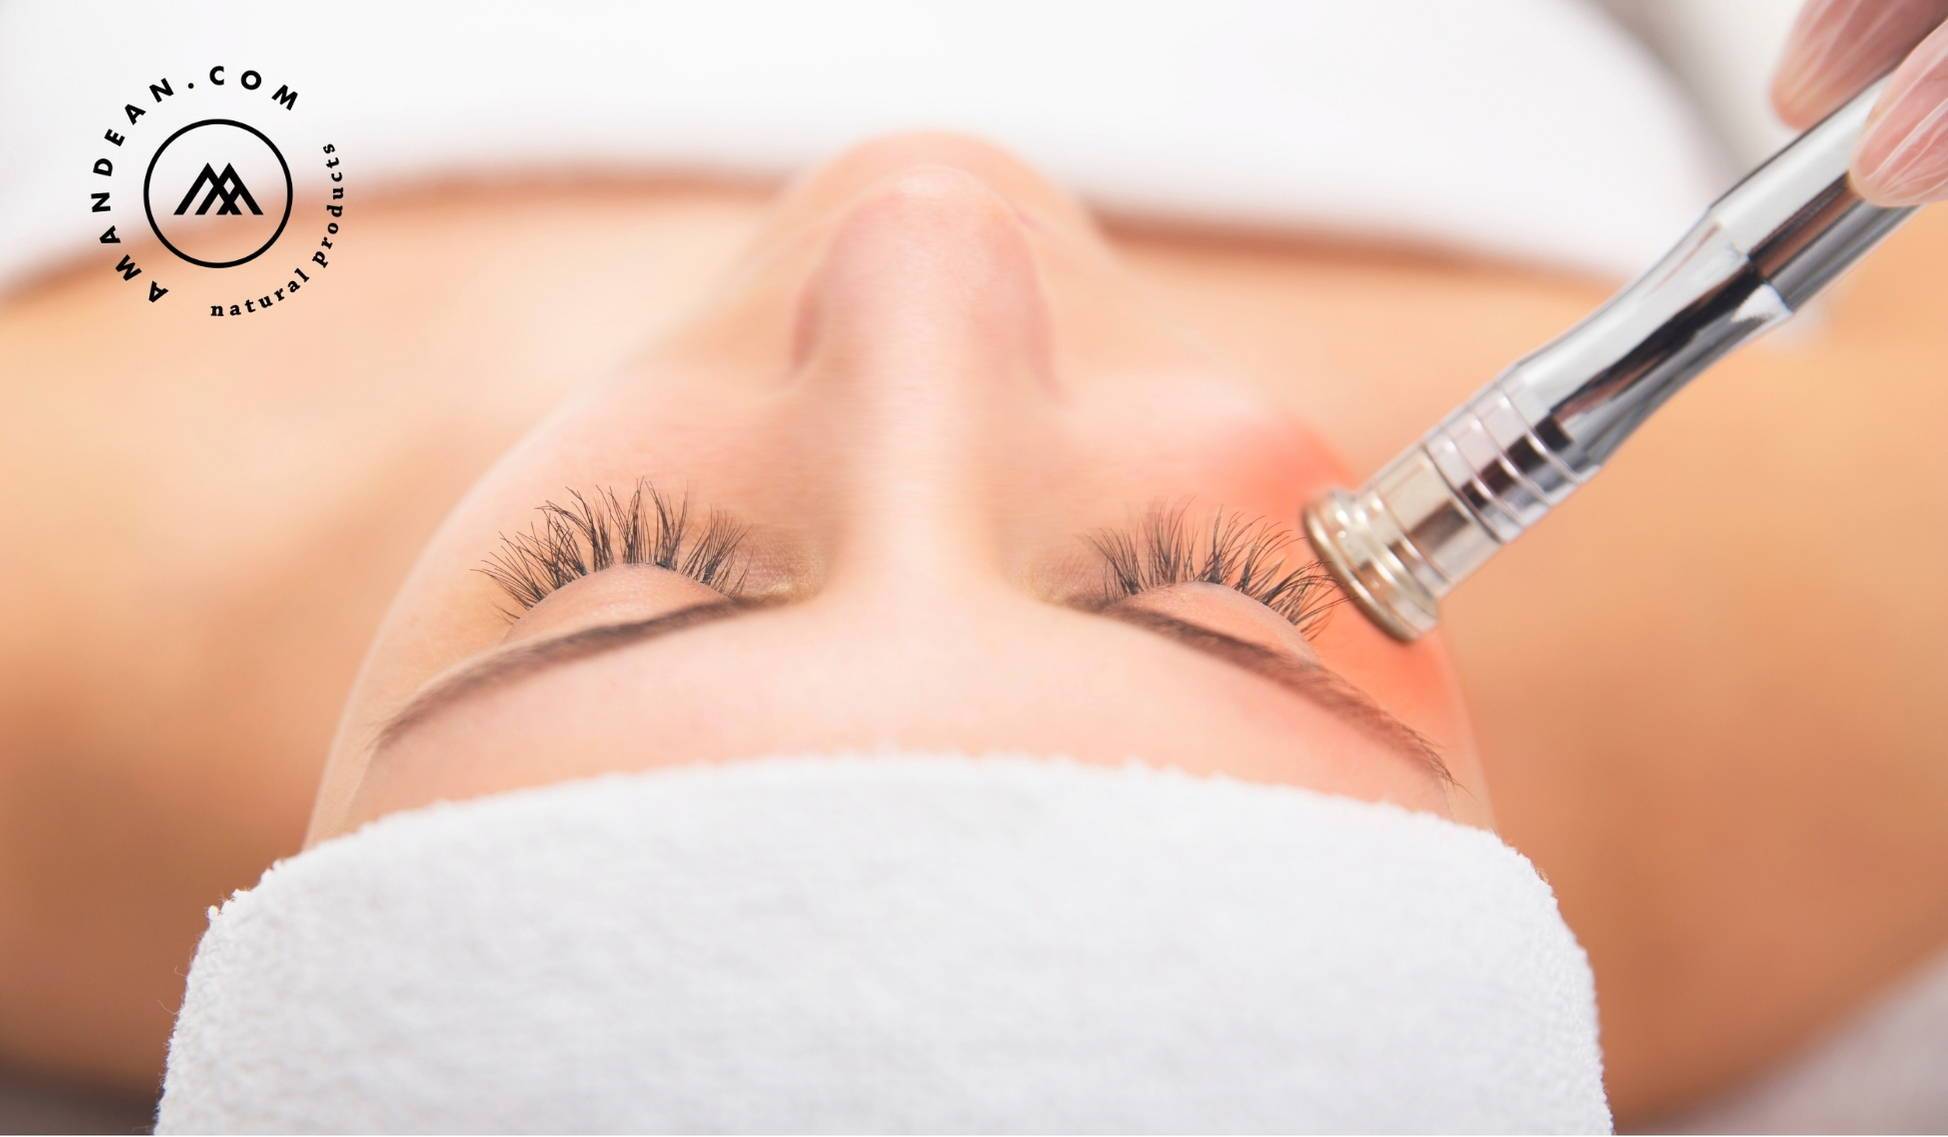 The Natural Way To Maximize Microdermabrasion's Results